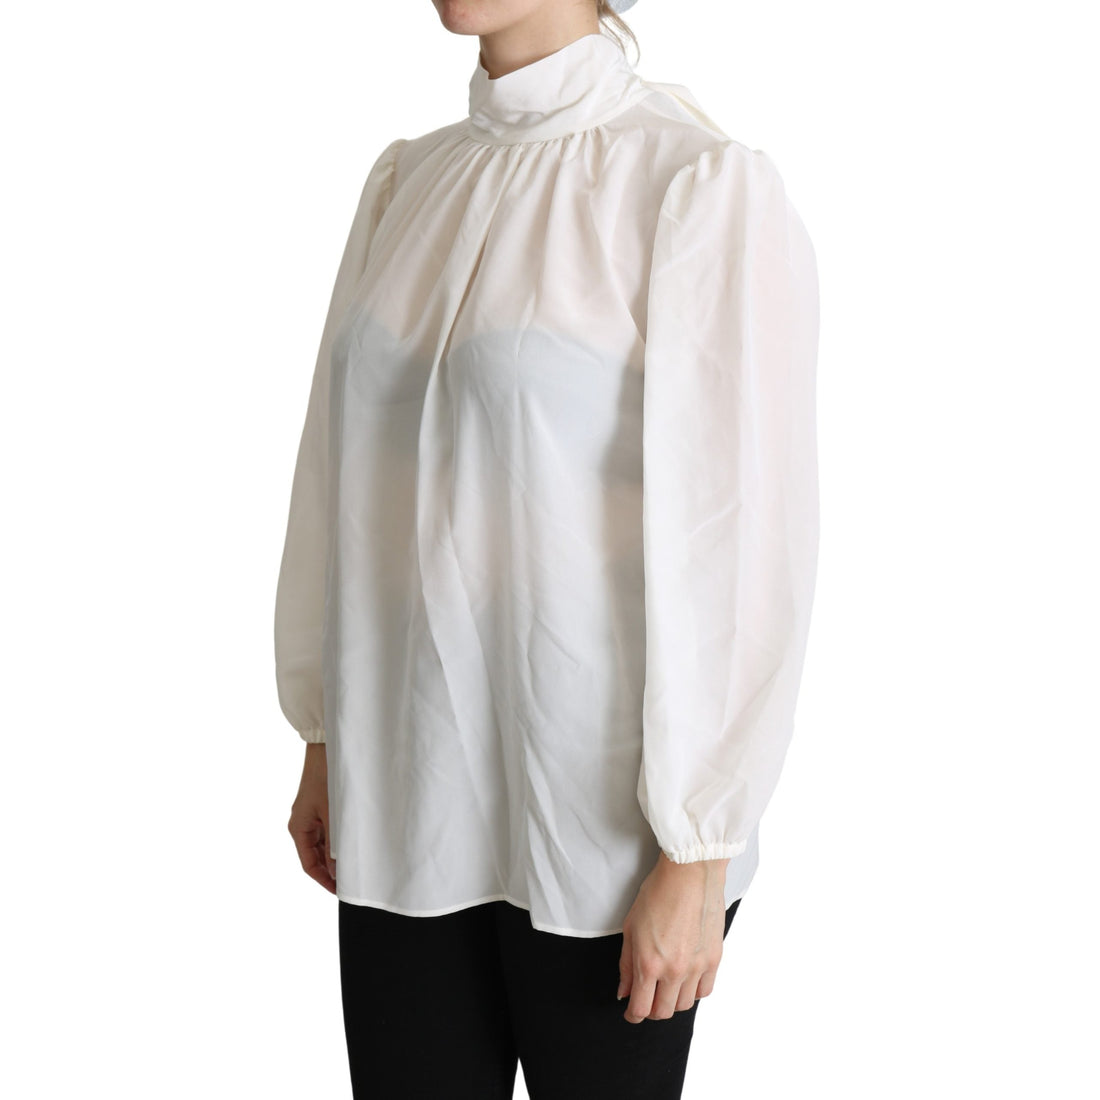 Dolce & Gabbana White Silk Pussy Bow Long Sleeved Top Blouse - Paris Deluxe